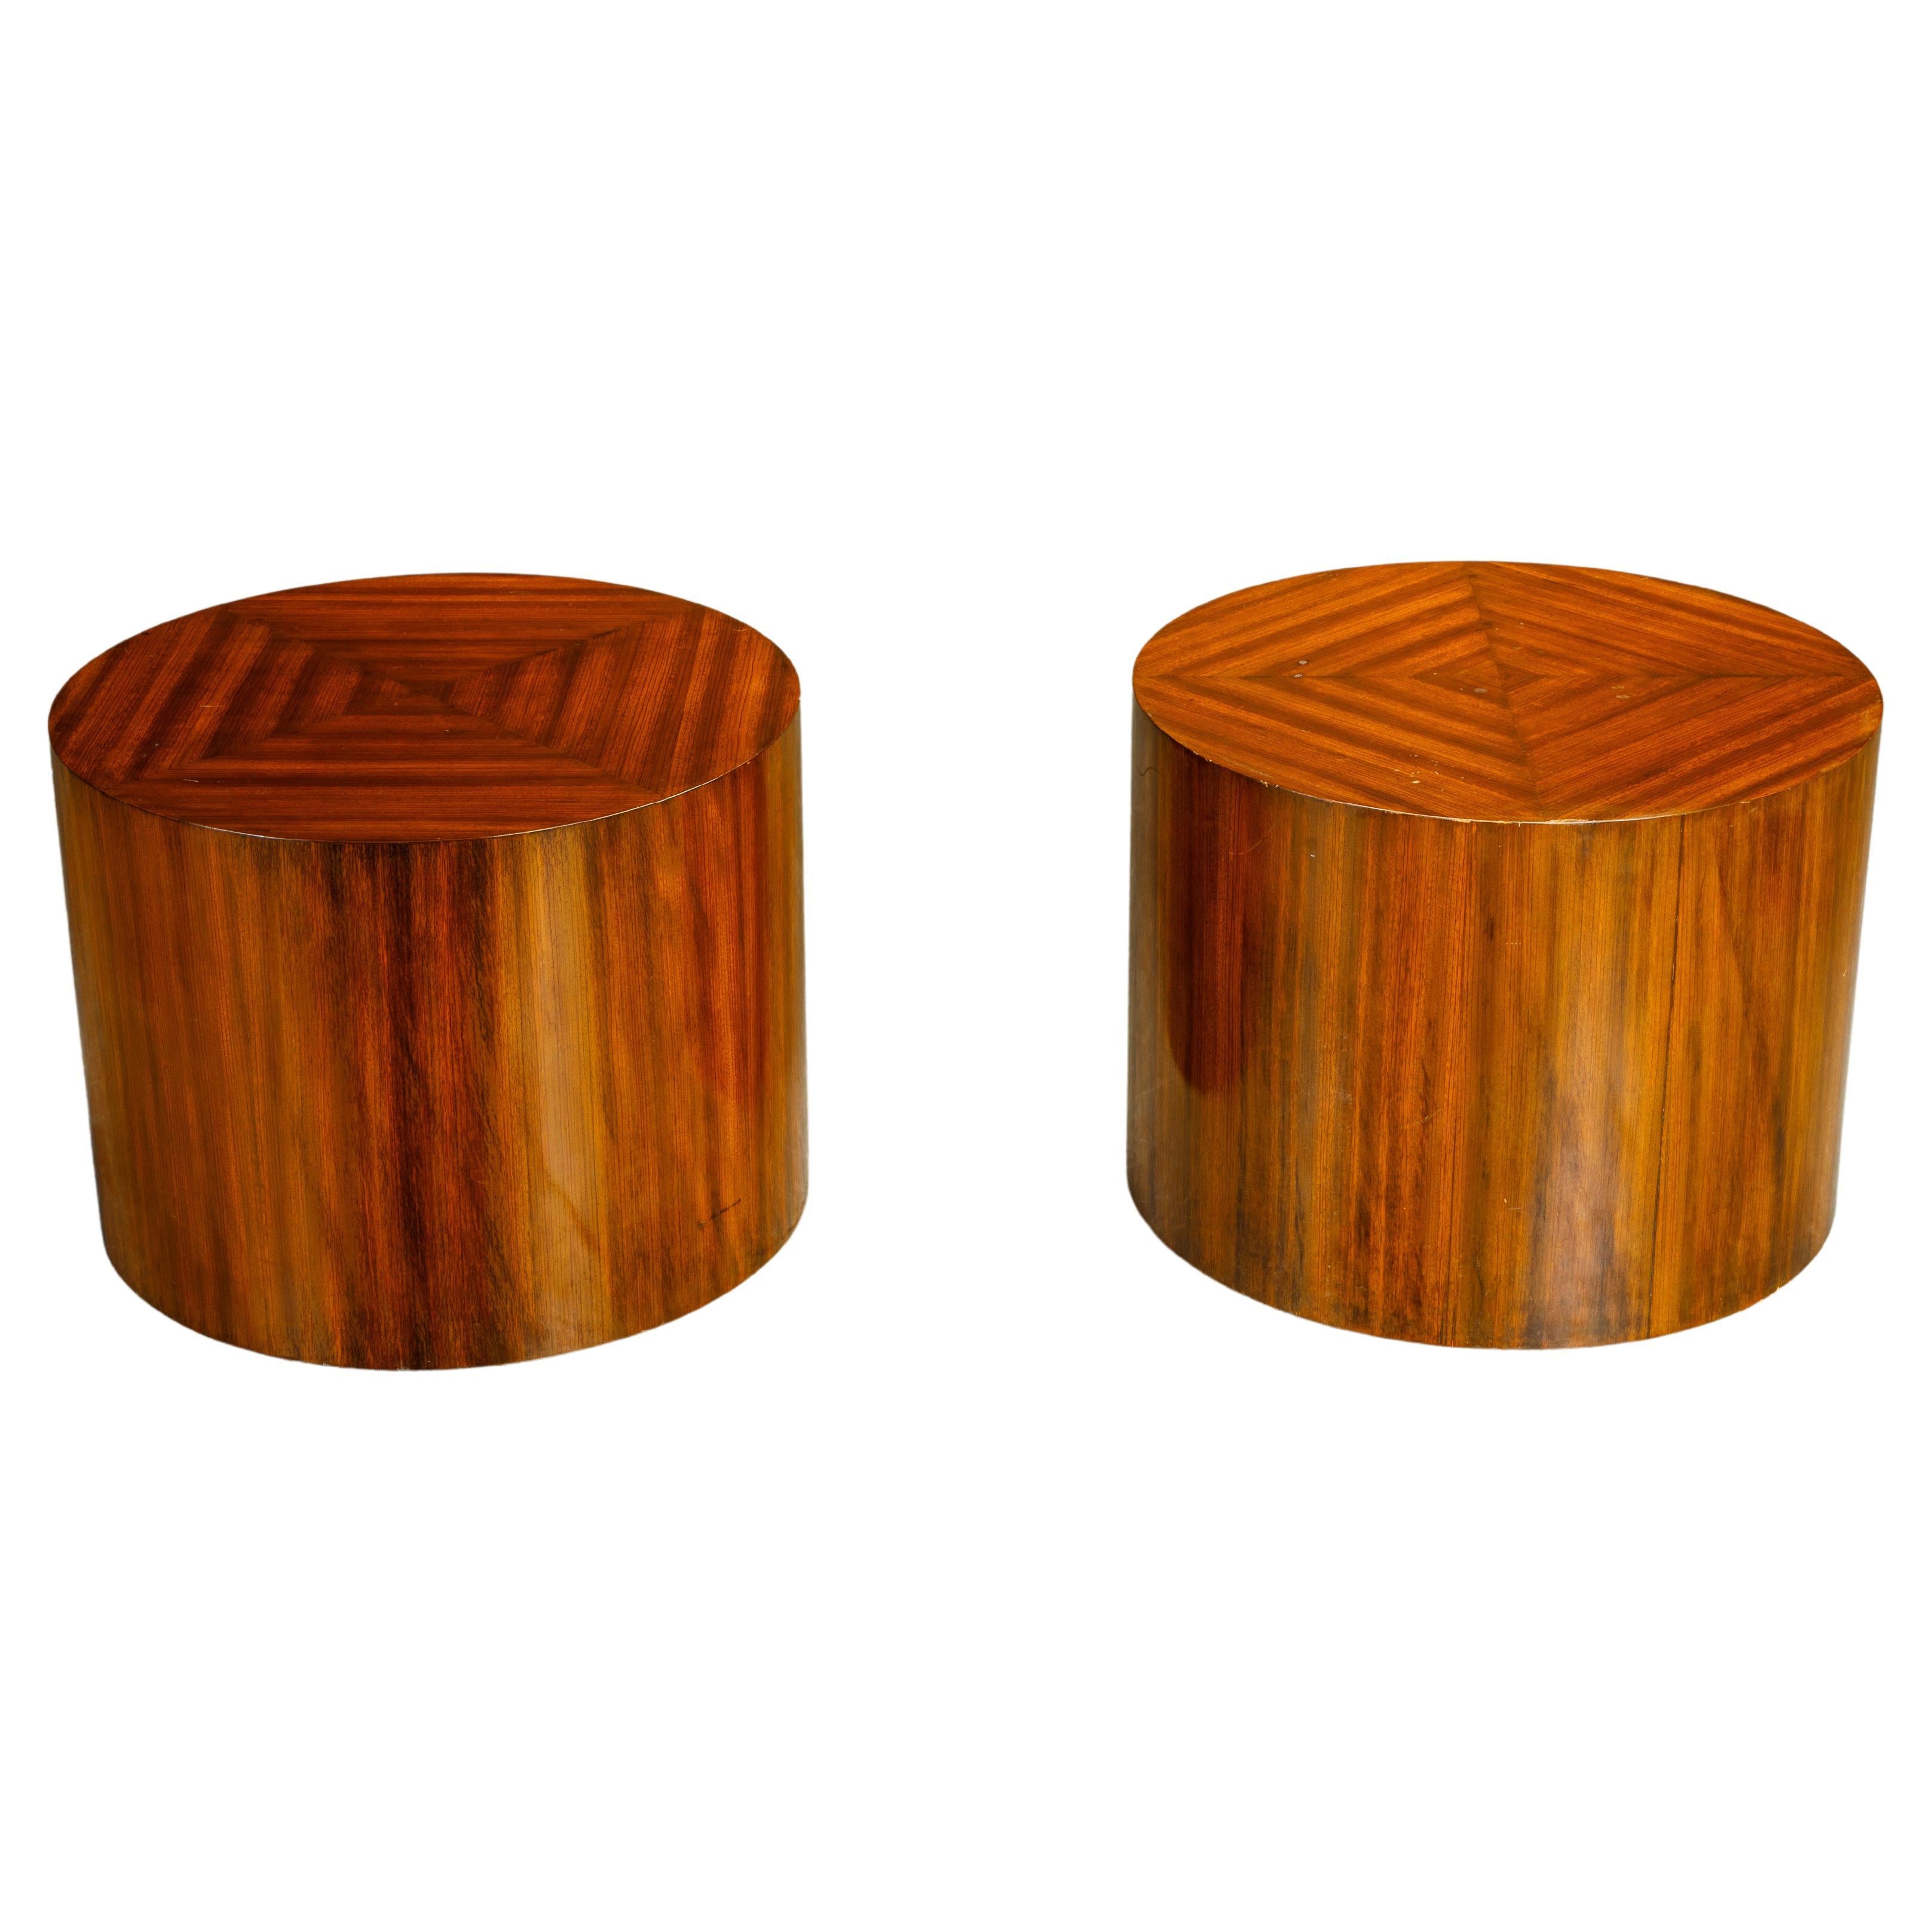 Pair of Mid-Century Modern Drum Form Wood Side Tables / Pedestals, circa 1970s